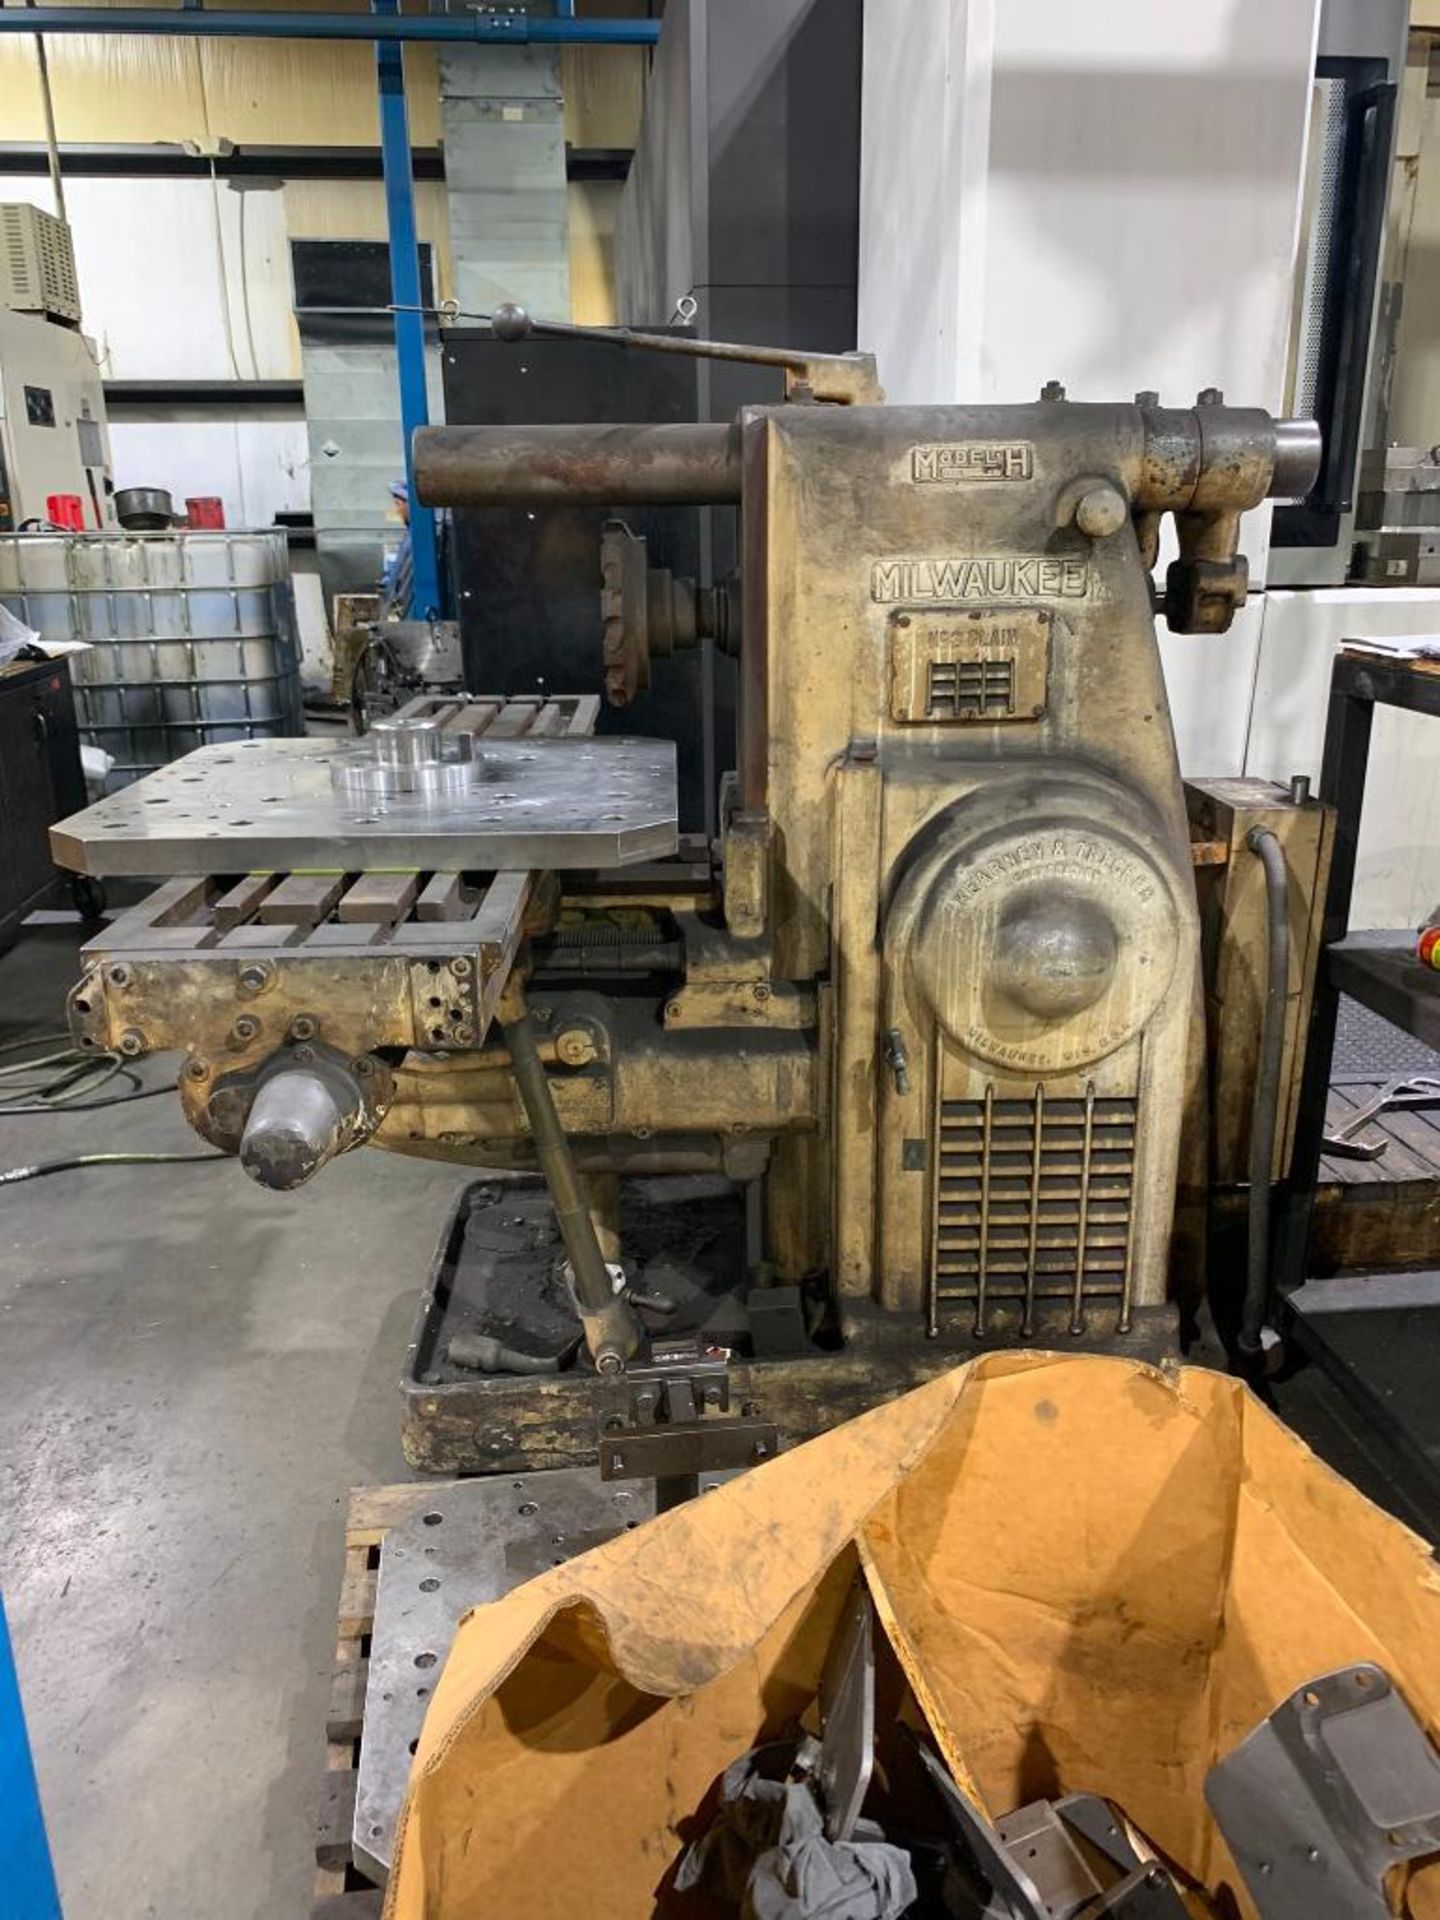 MILWAUKEE MILLING MACHINE, MODEL H, S/N 29-5487 (PLATE ON TOP OF THE TABLE IS NOT INCLUDED) (END LOC - Image 3 of 3